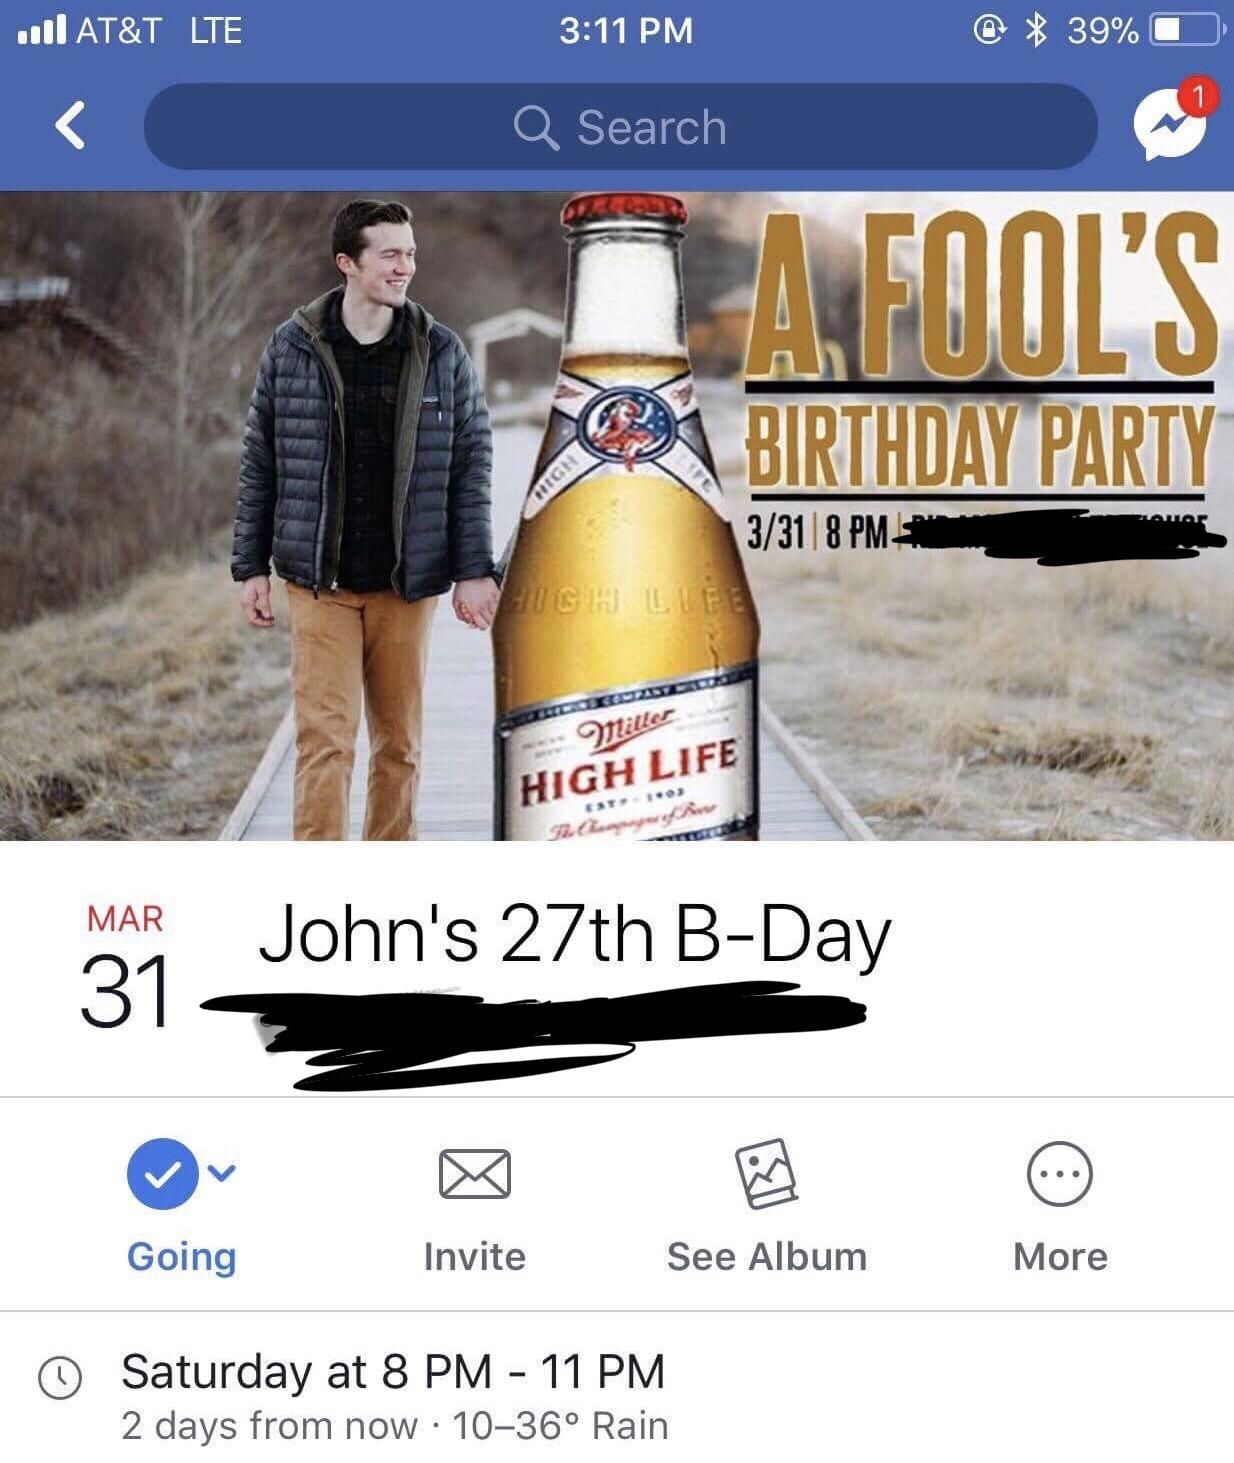 Johns fiancé cheated on him, so he made his engagement photos into hilarious birthday invites.